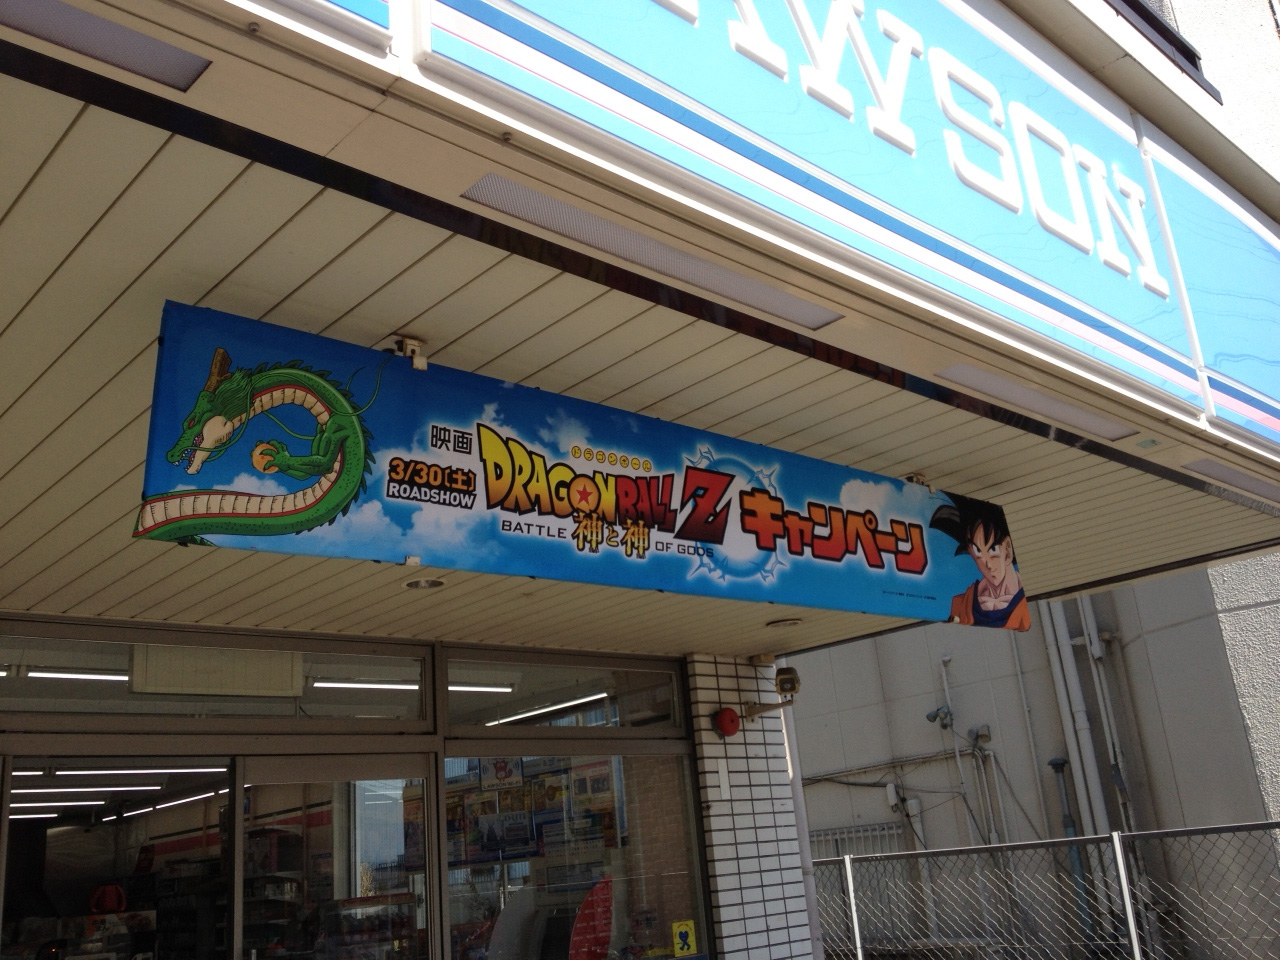 Dragon Ball Super: Super Hero Snacks and Goods Offered at Lawson